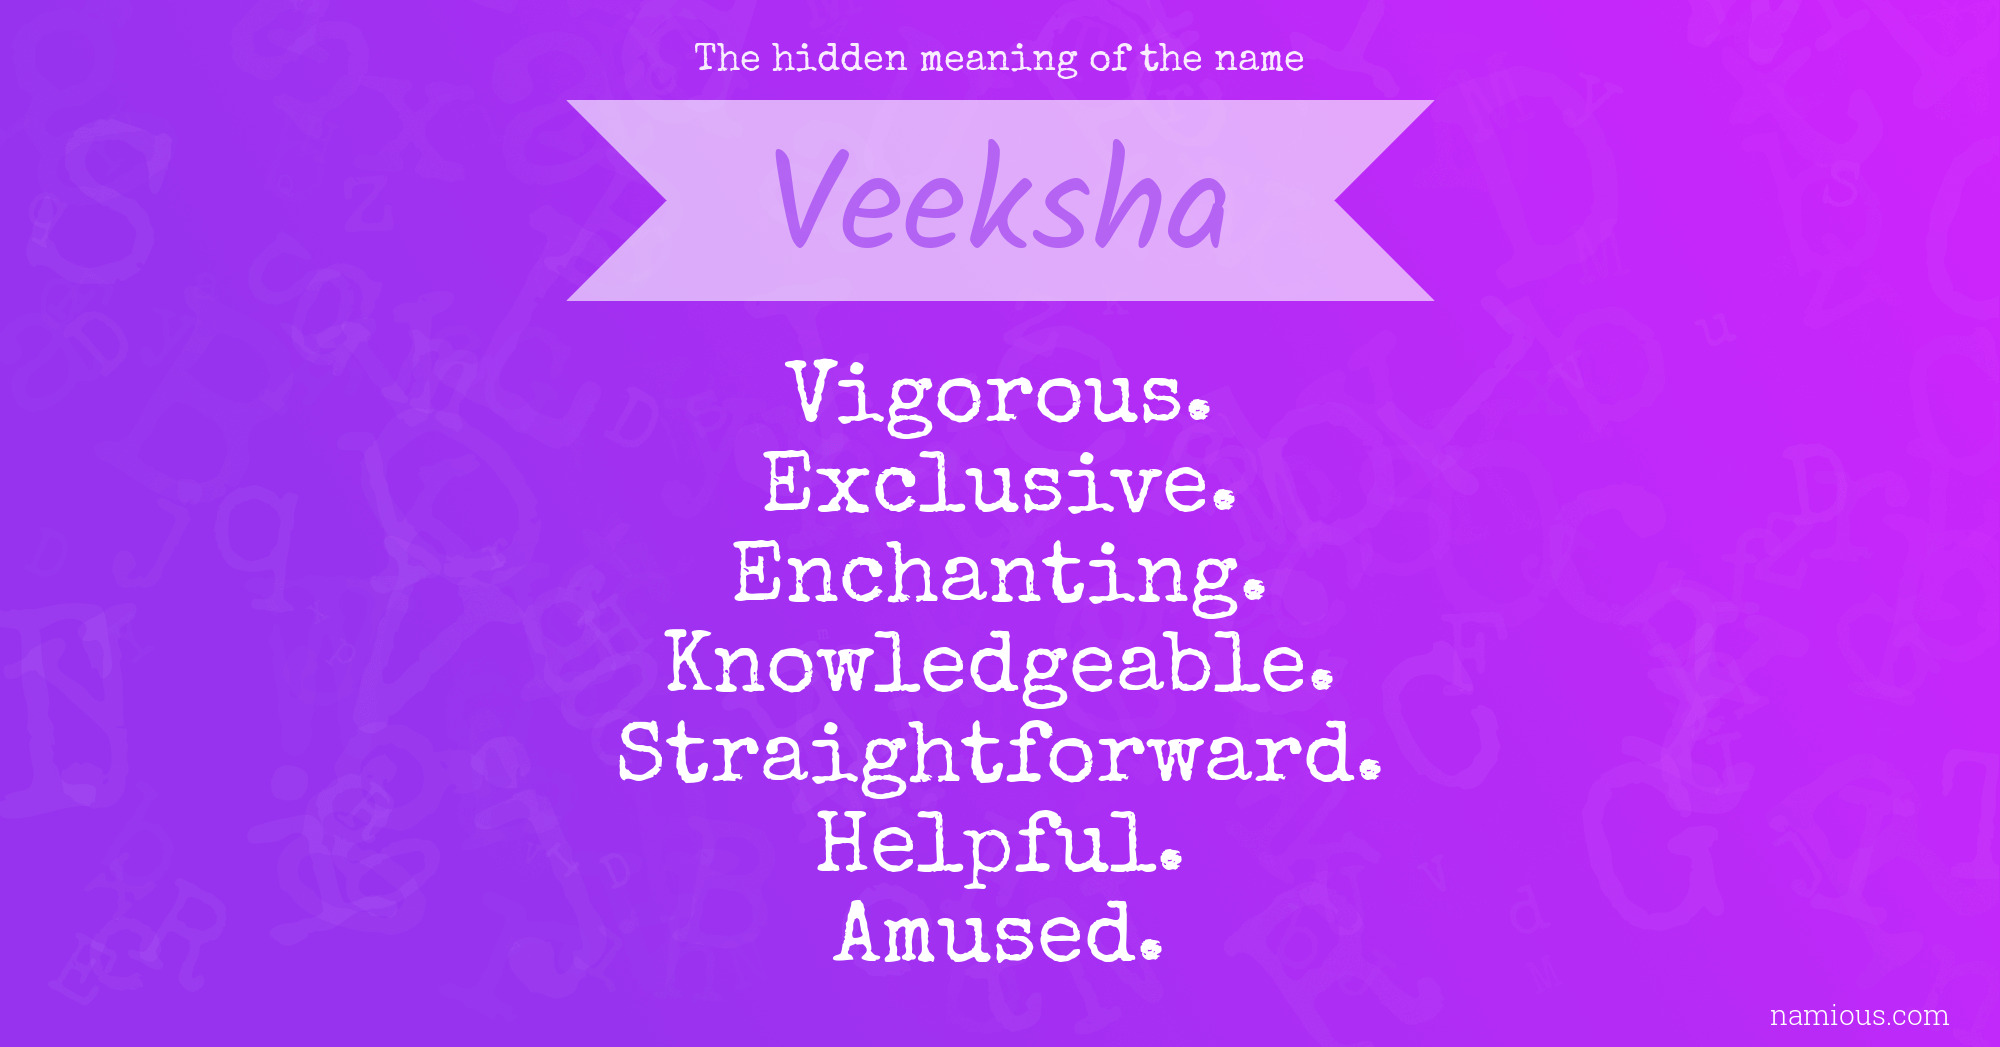 The hidden meaning of the name Veeksha